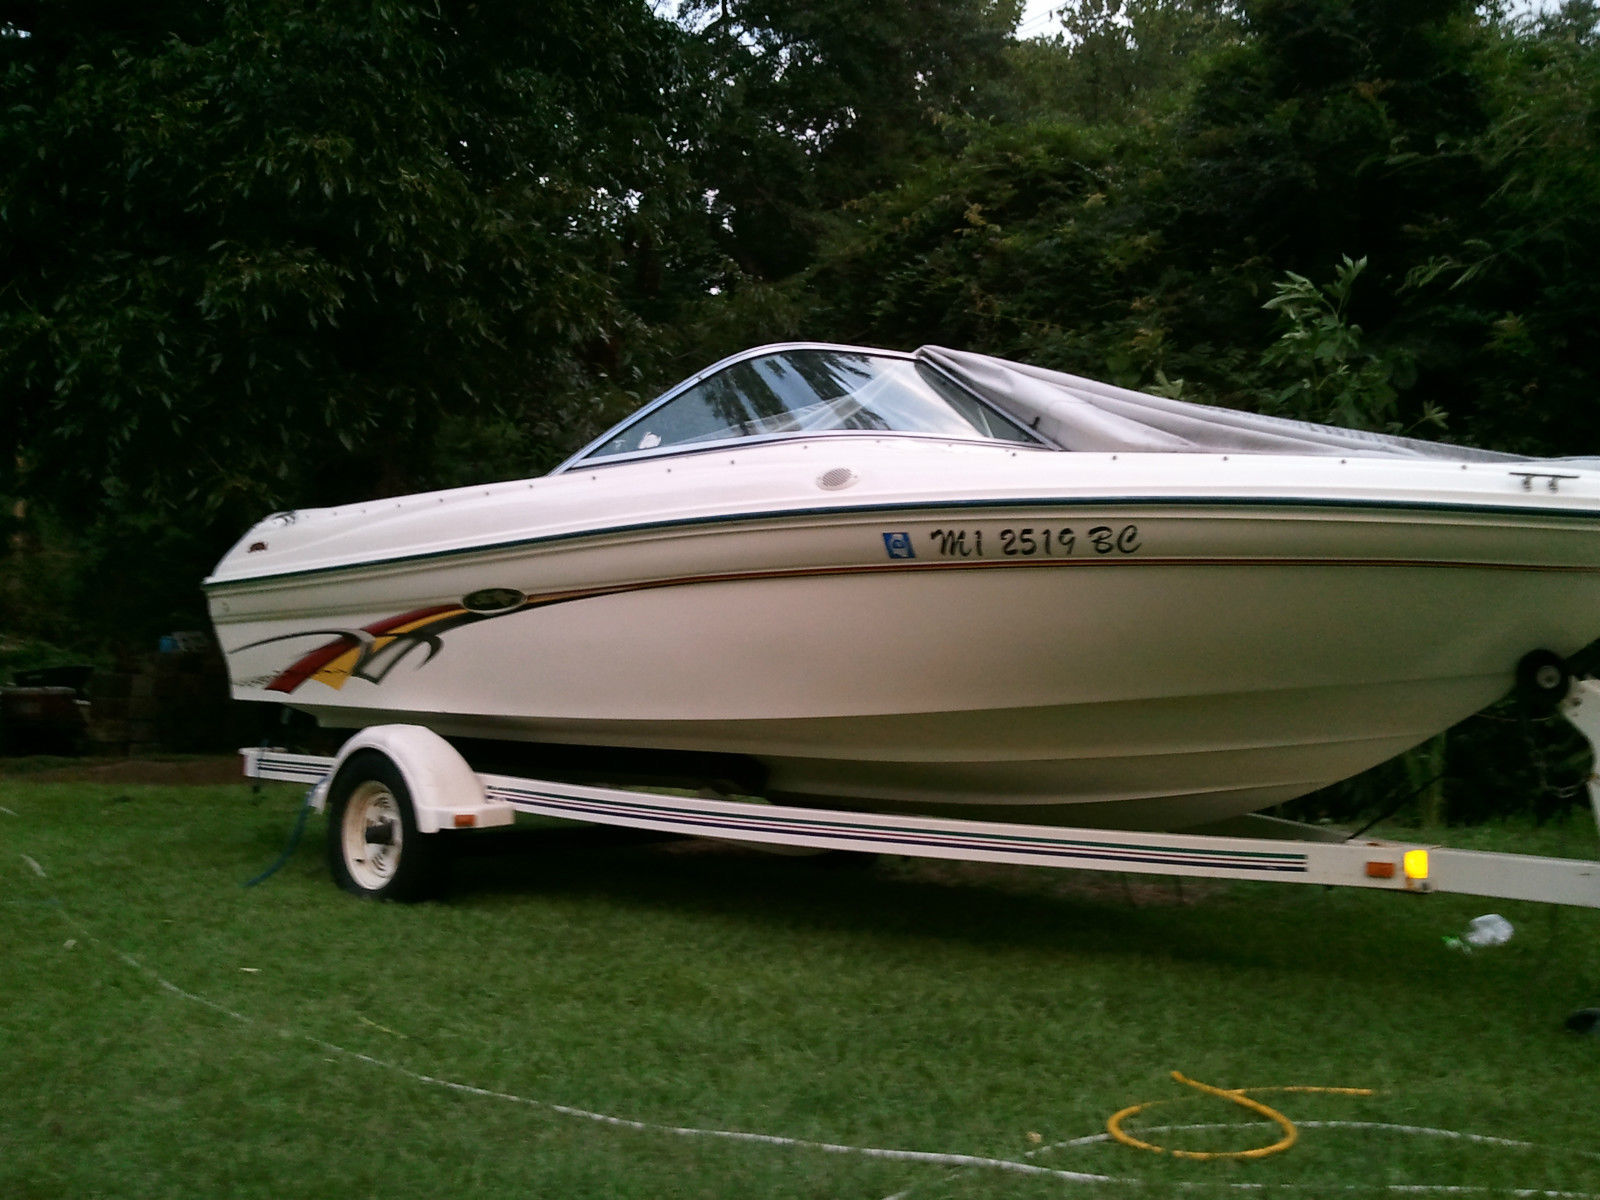 Sea Ray 180BR Bowrider Ski Boat 135Mercruiser I/O 1998 for sale for $7,500 - Boats-from-USA.com